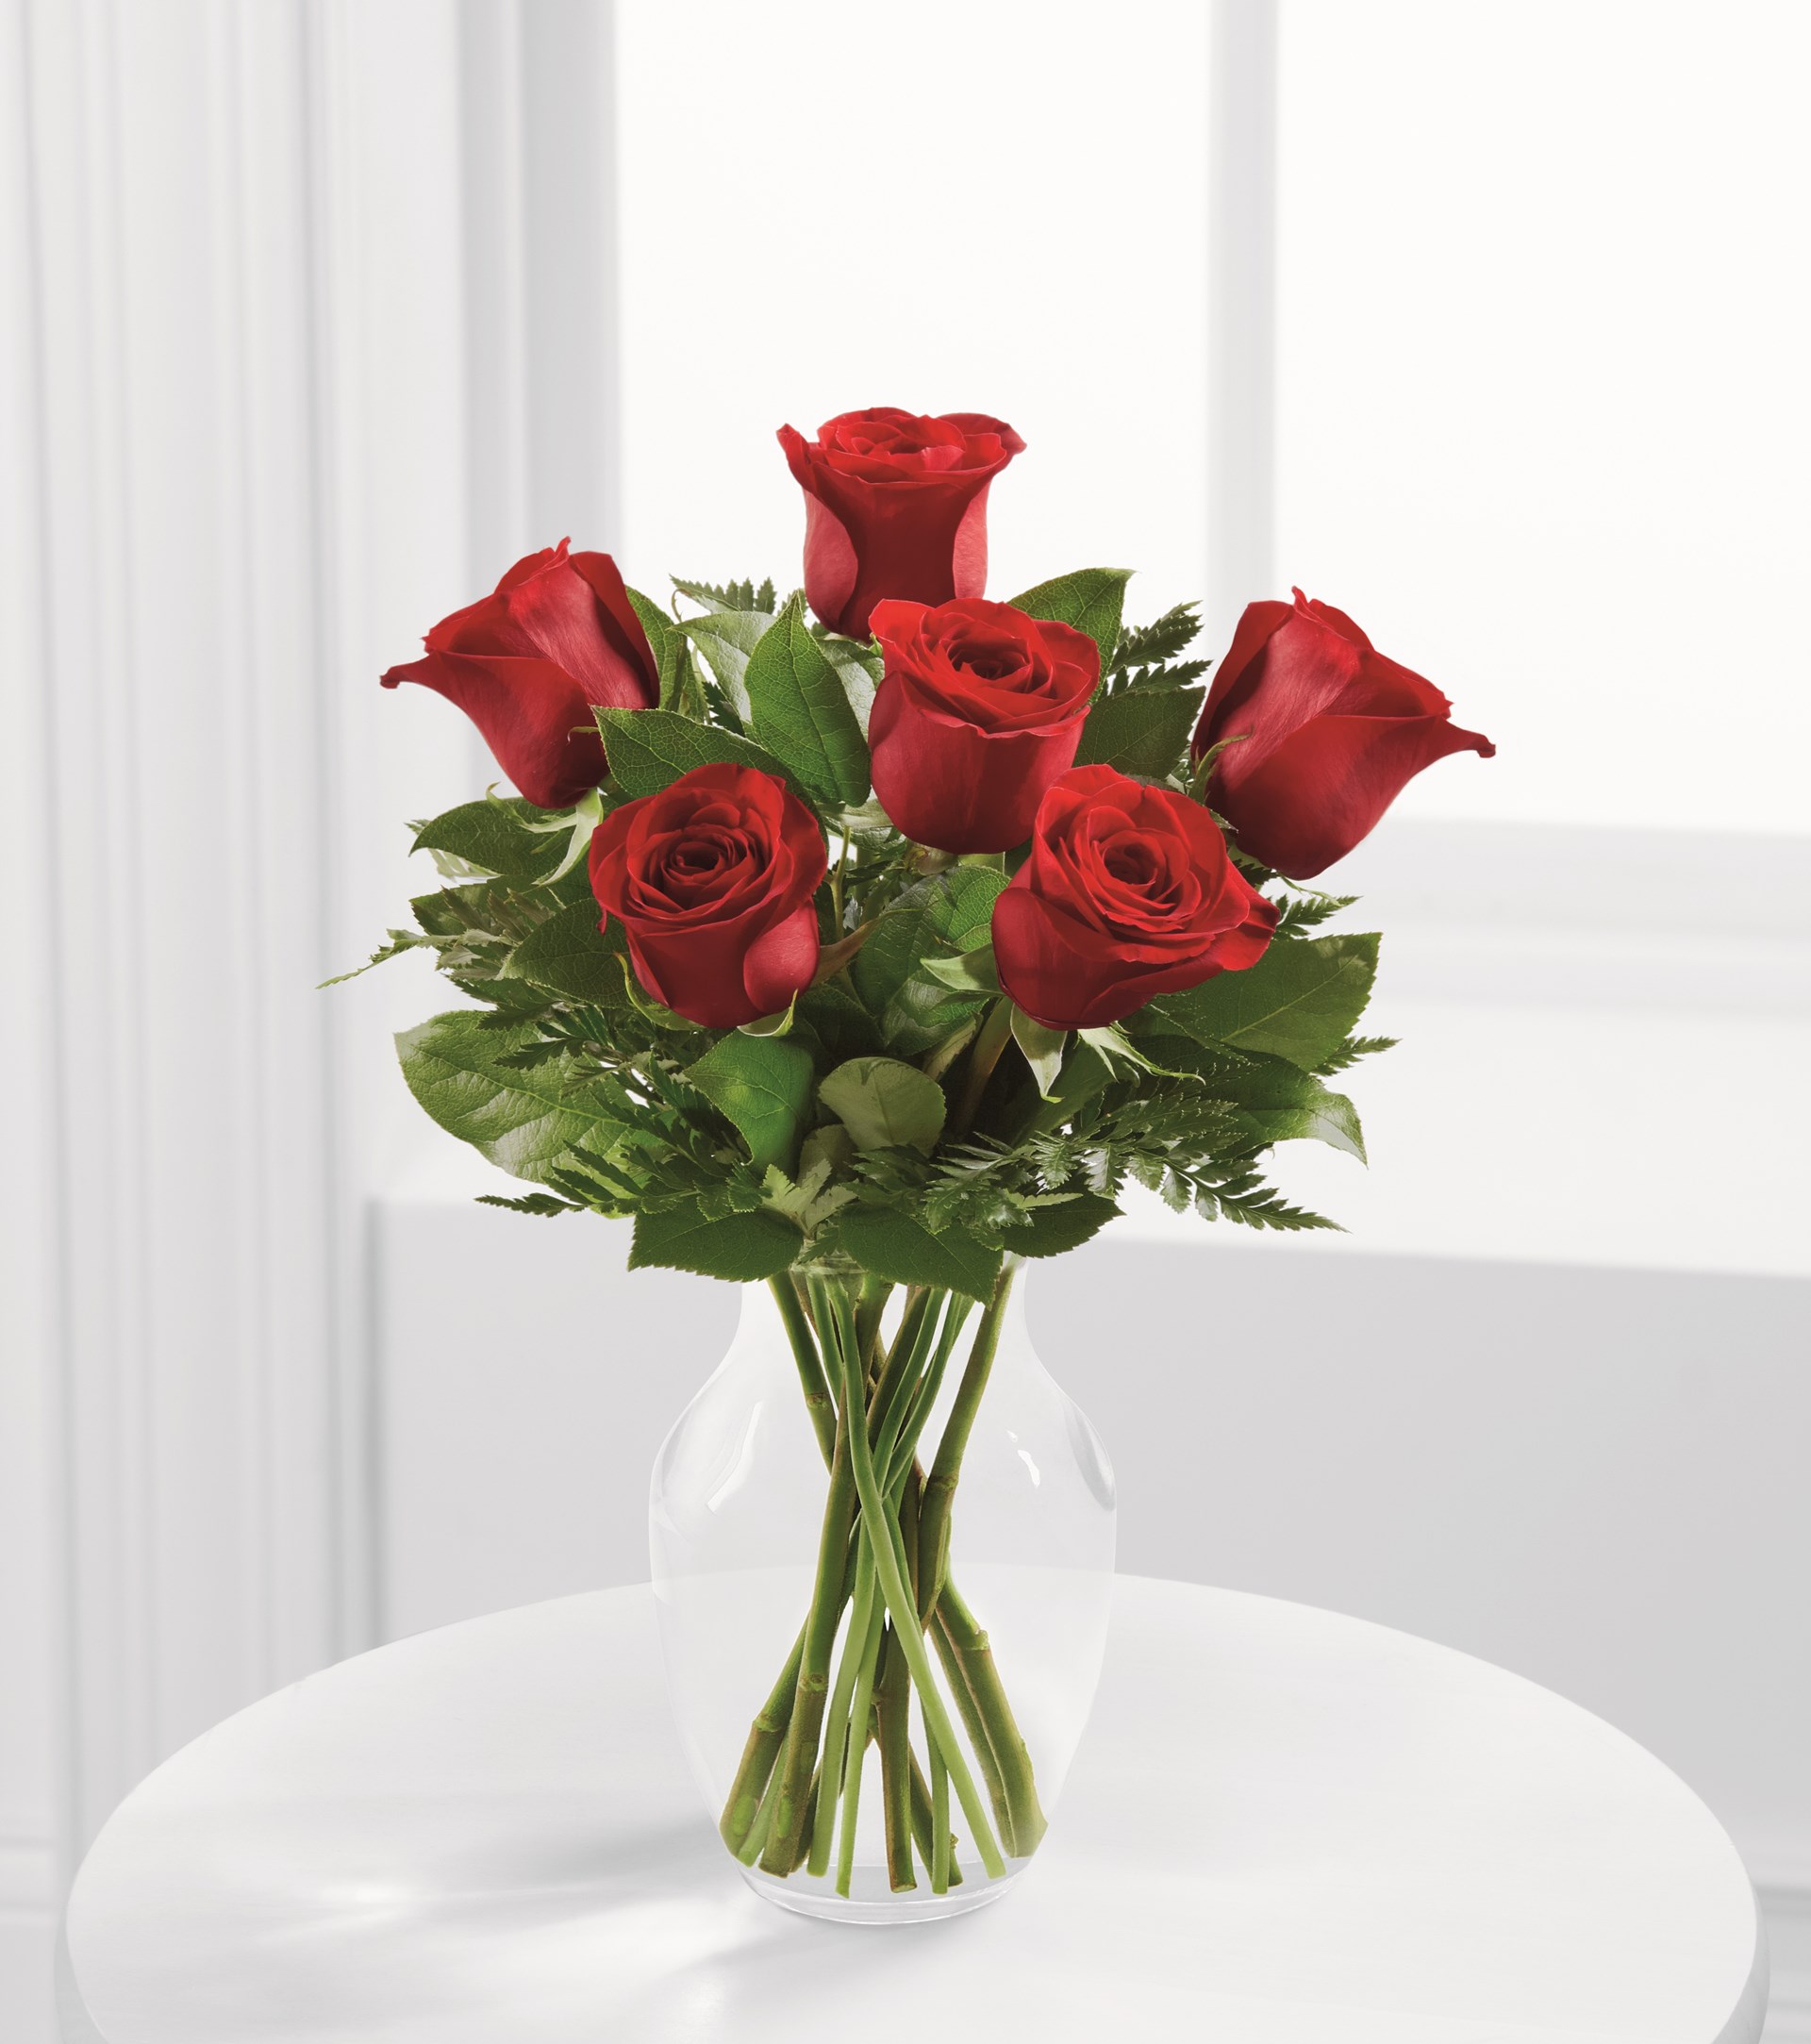 product image for The Simply Enchanting Rose Bouquet by FTD - VASE INCLUDED